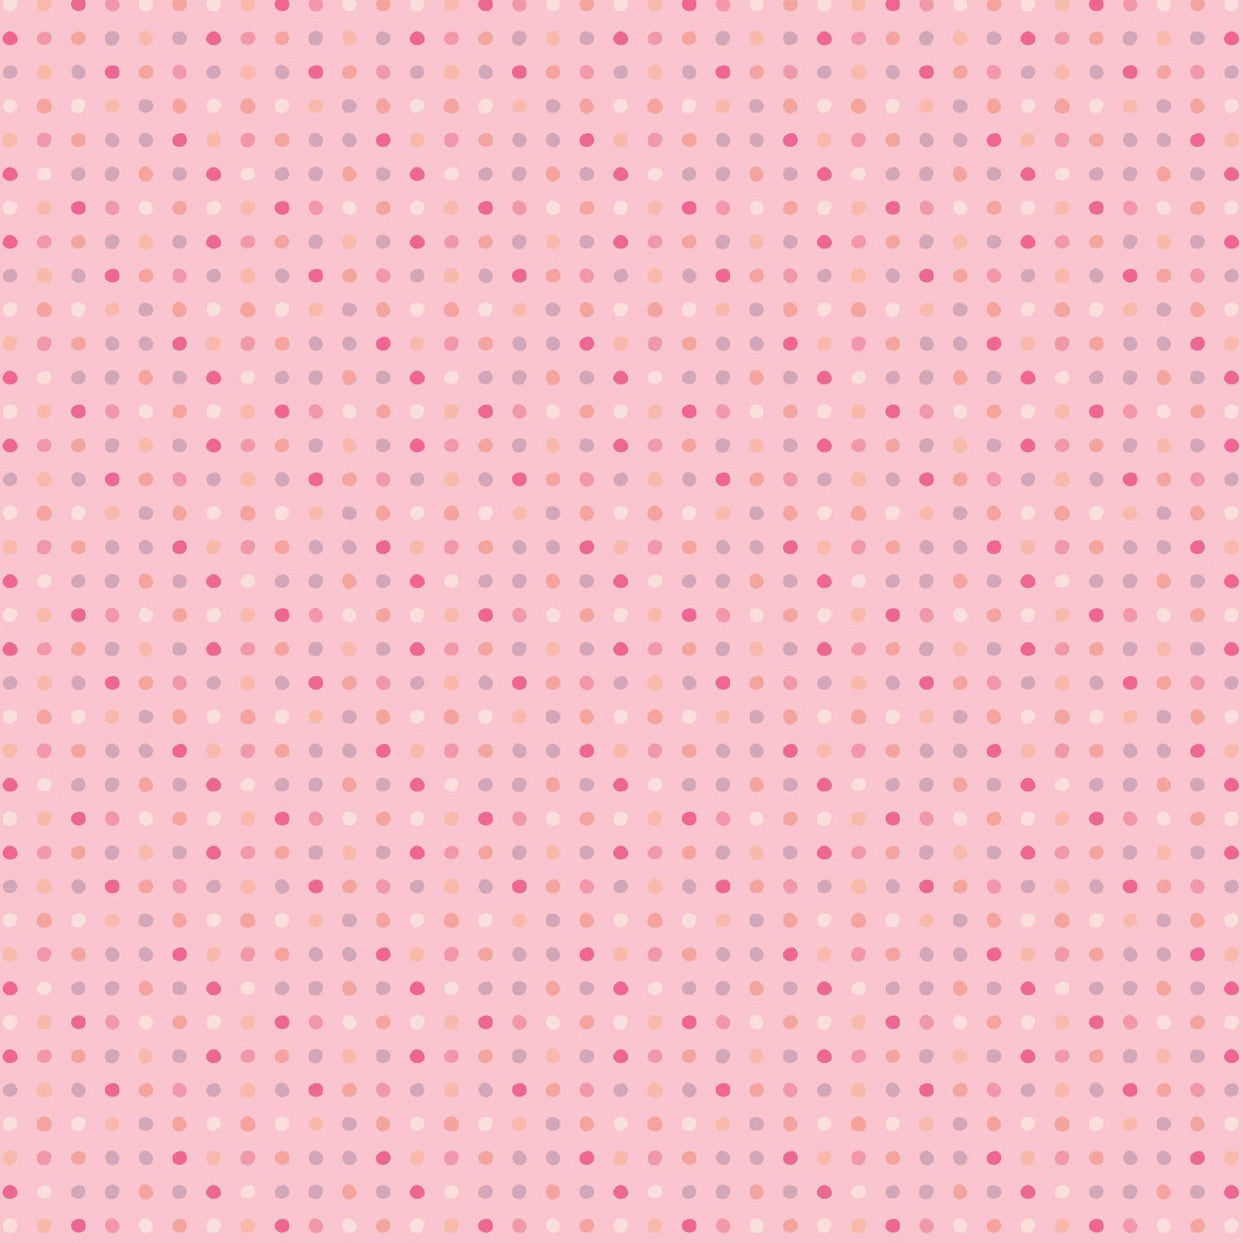 Seeing Spots, Pink Champagne Lt. Pink, SS24193, sold by the 1/2 yard